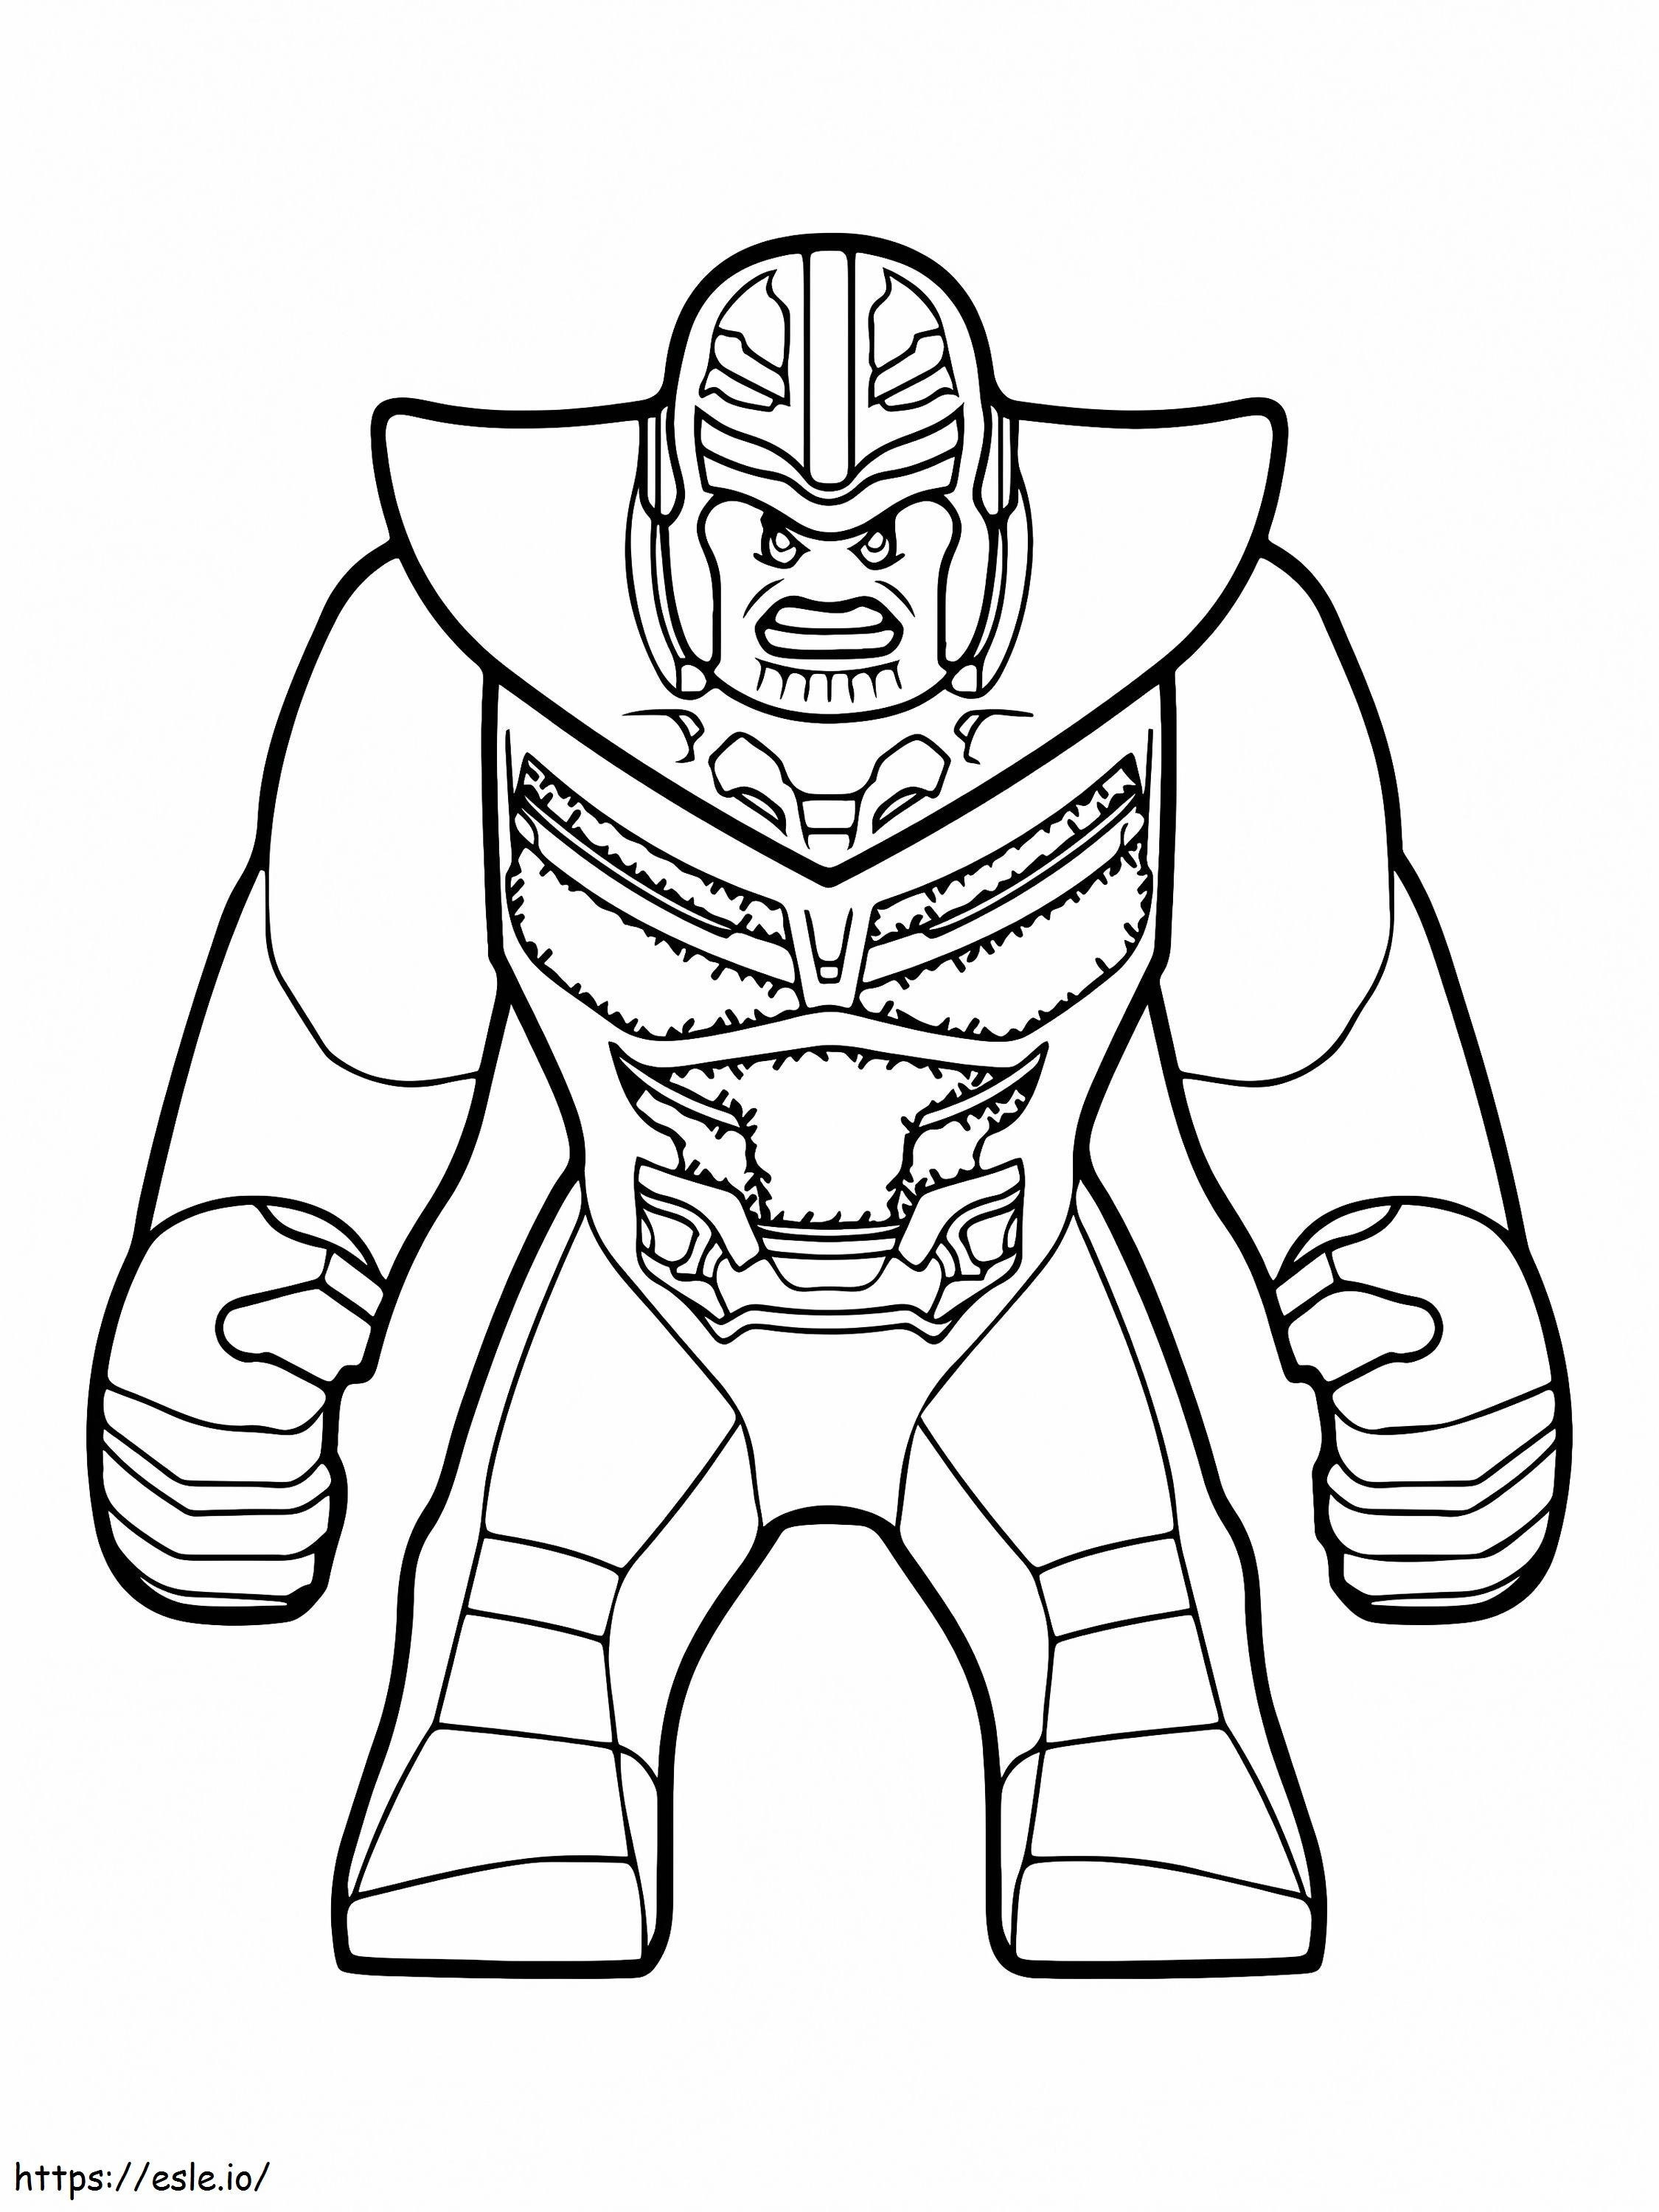 Thanos Lego Avengers coloring page